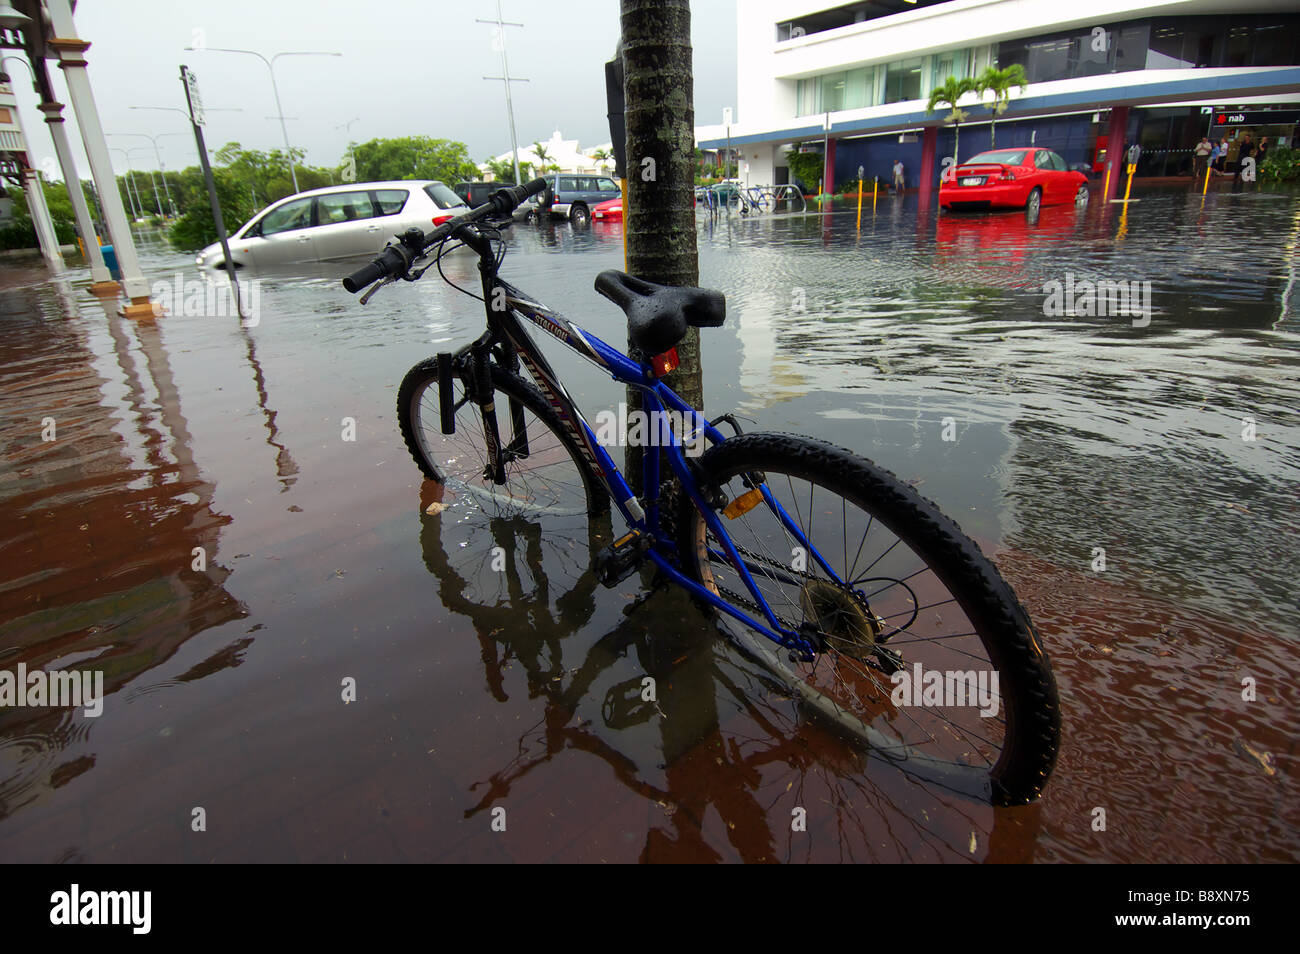 Flash flooding in catches bicycles and cars in the city streets Cairns Queensland Australia Stock Photo